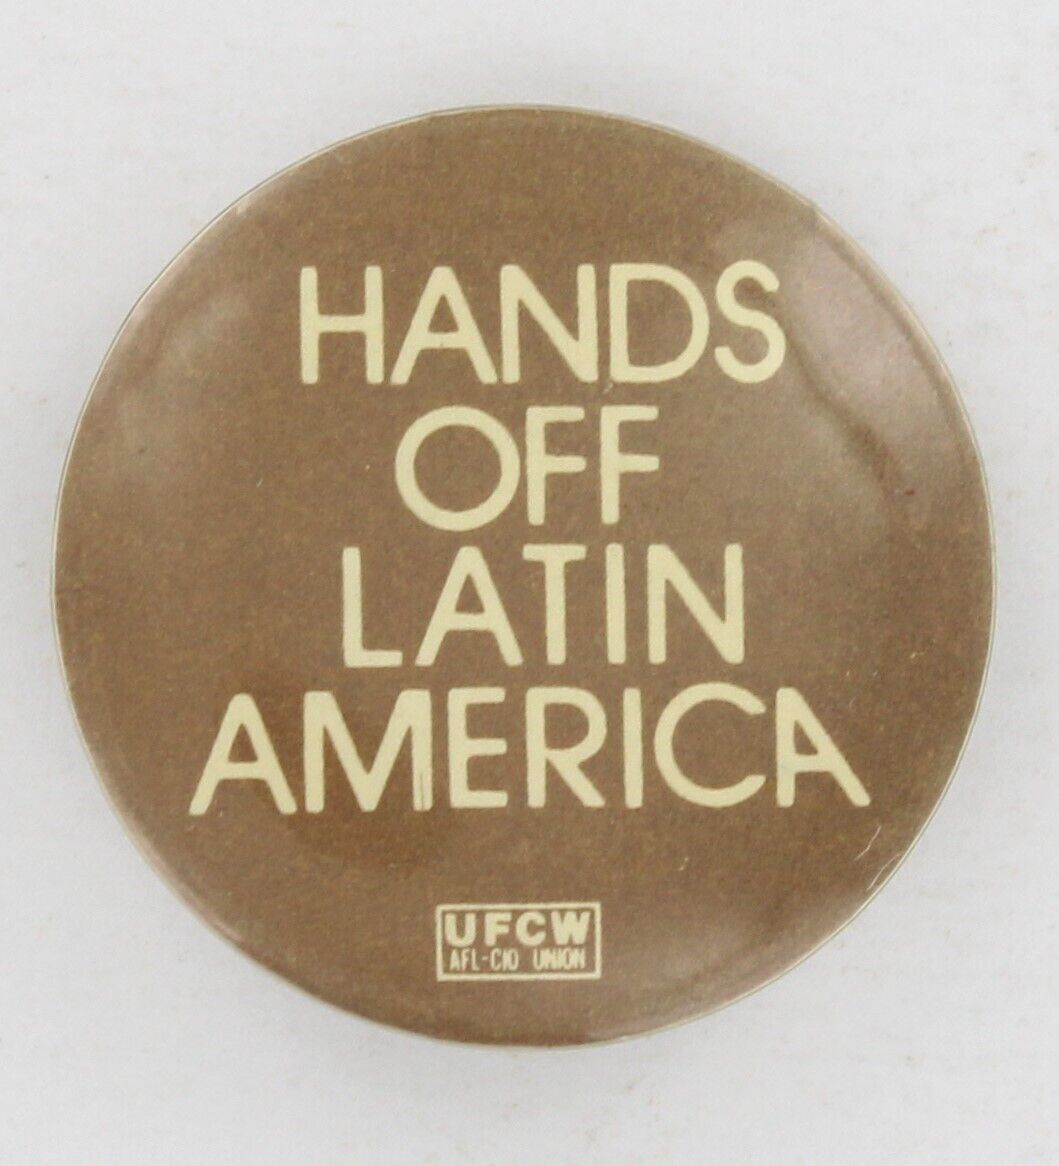 Hands Off Latin America 1980 UFCW United Food and Commercial Workers Union P1060